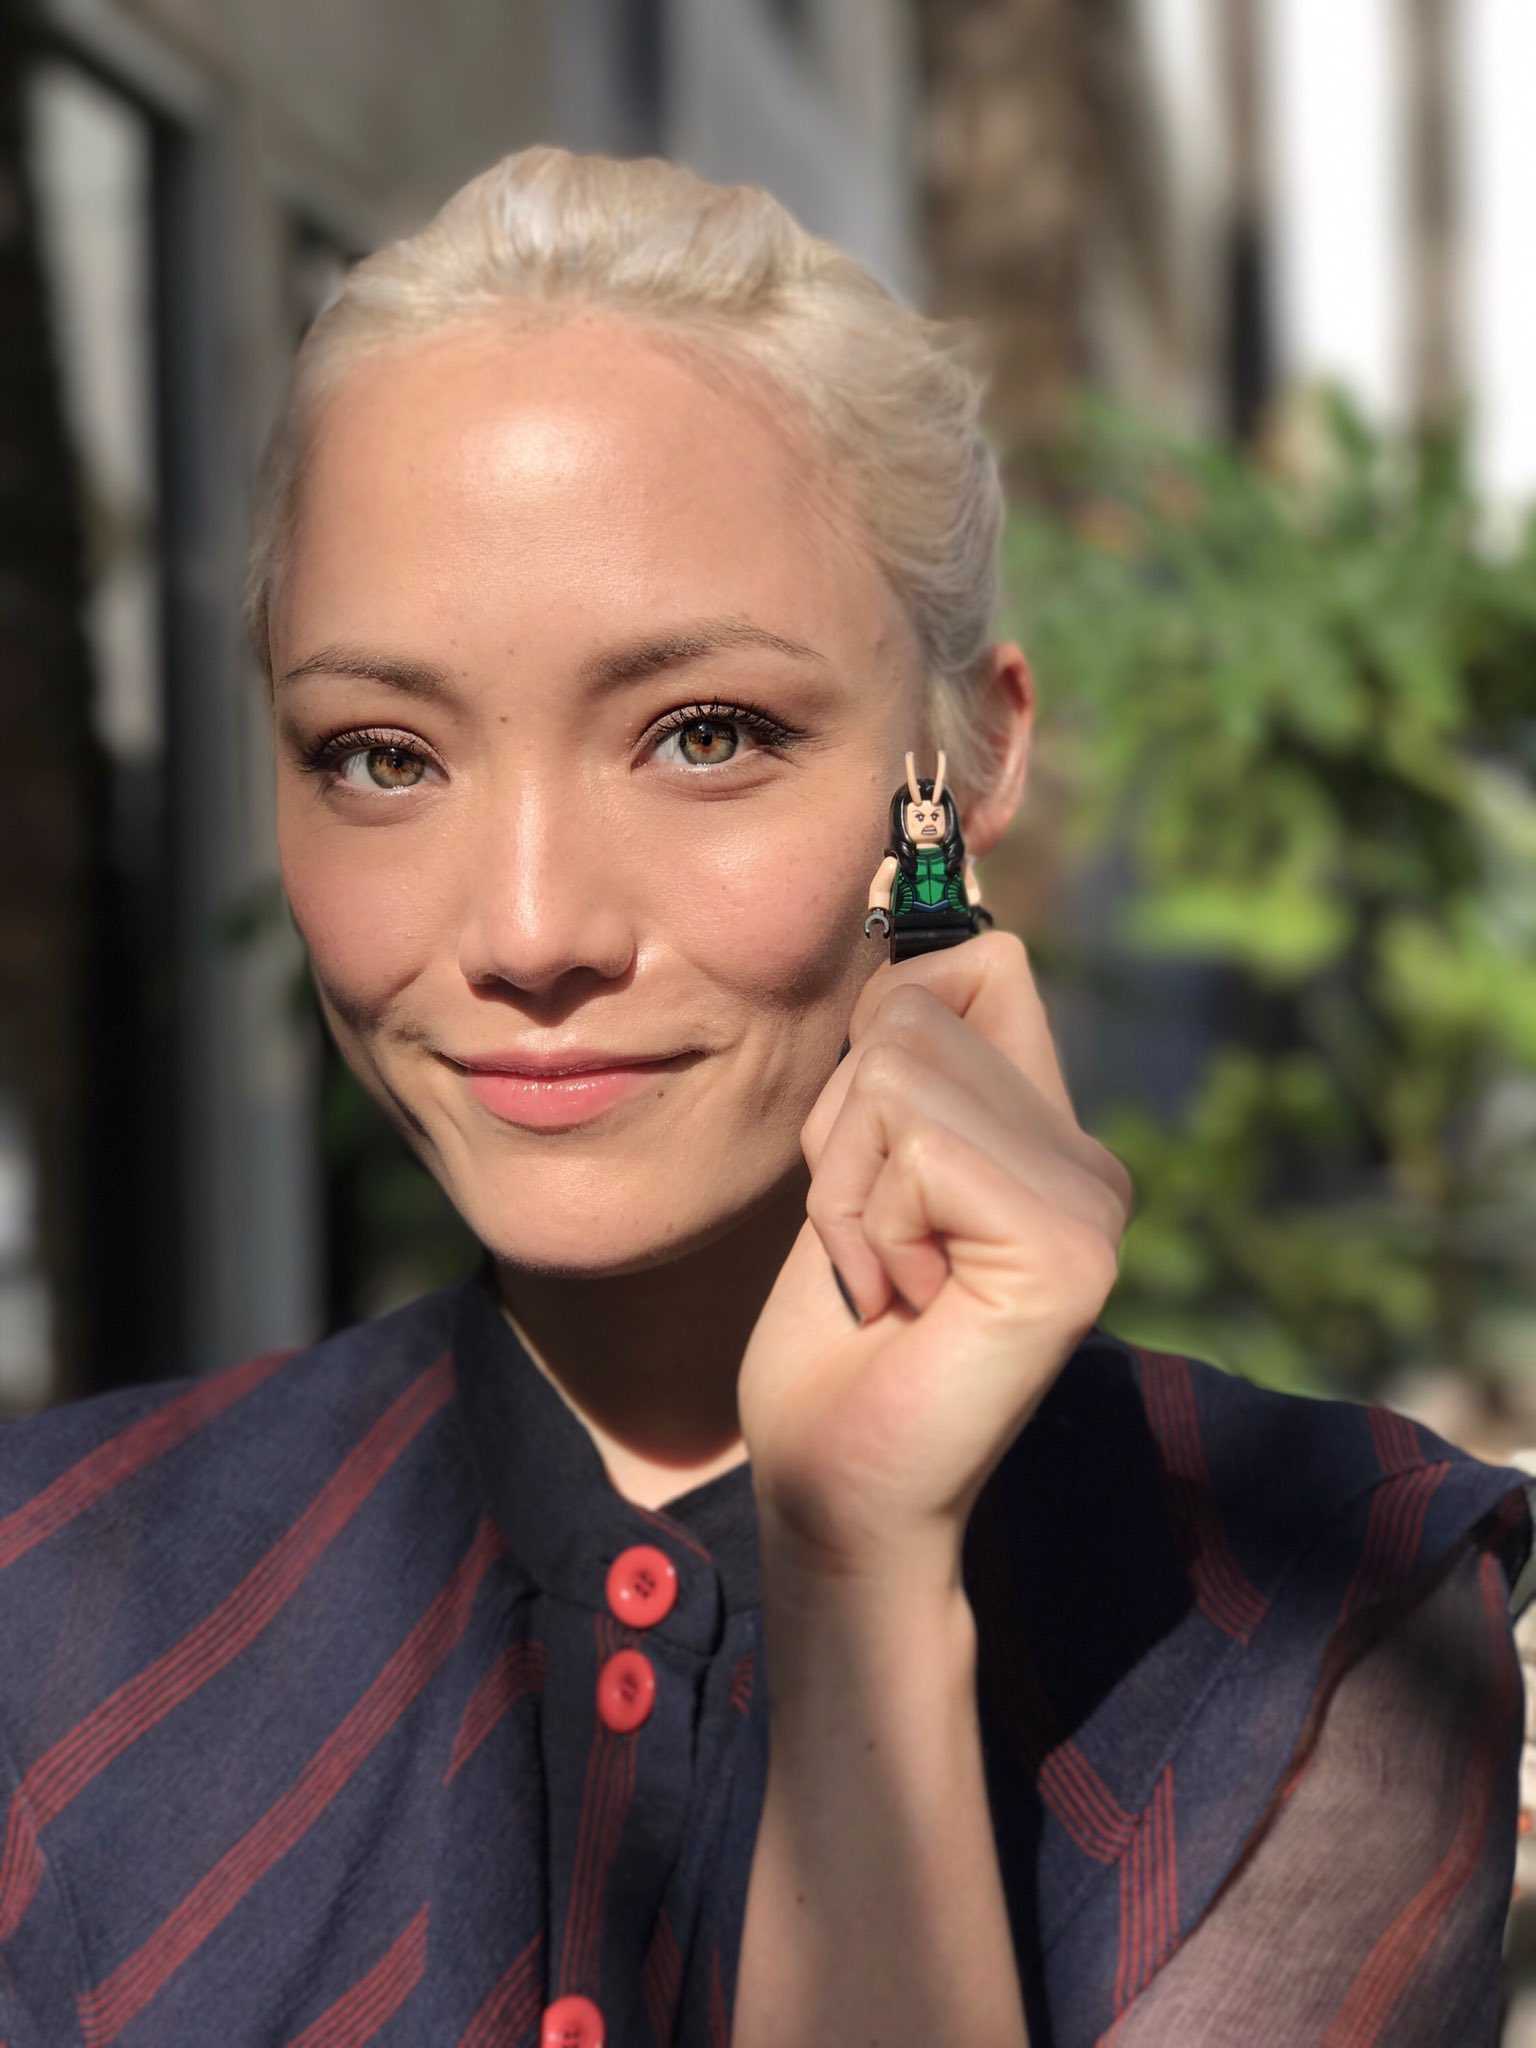 70+ Hot Pictures Of Pom Klementieff Who Plays Mantis In Marvel Cinematic Universe 227